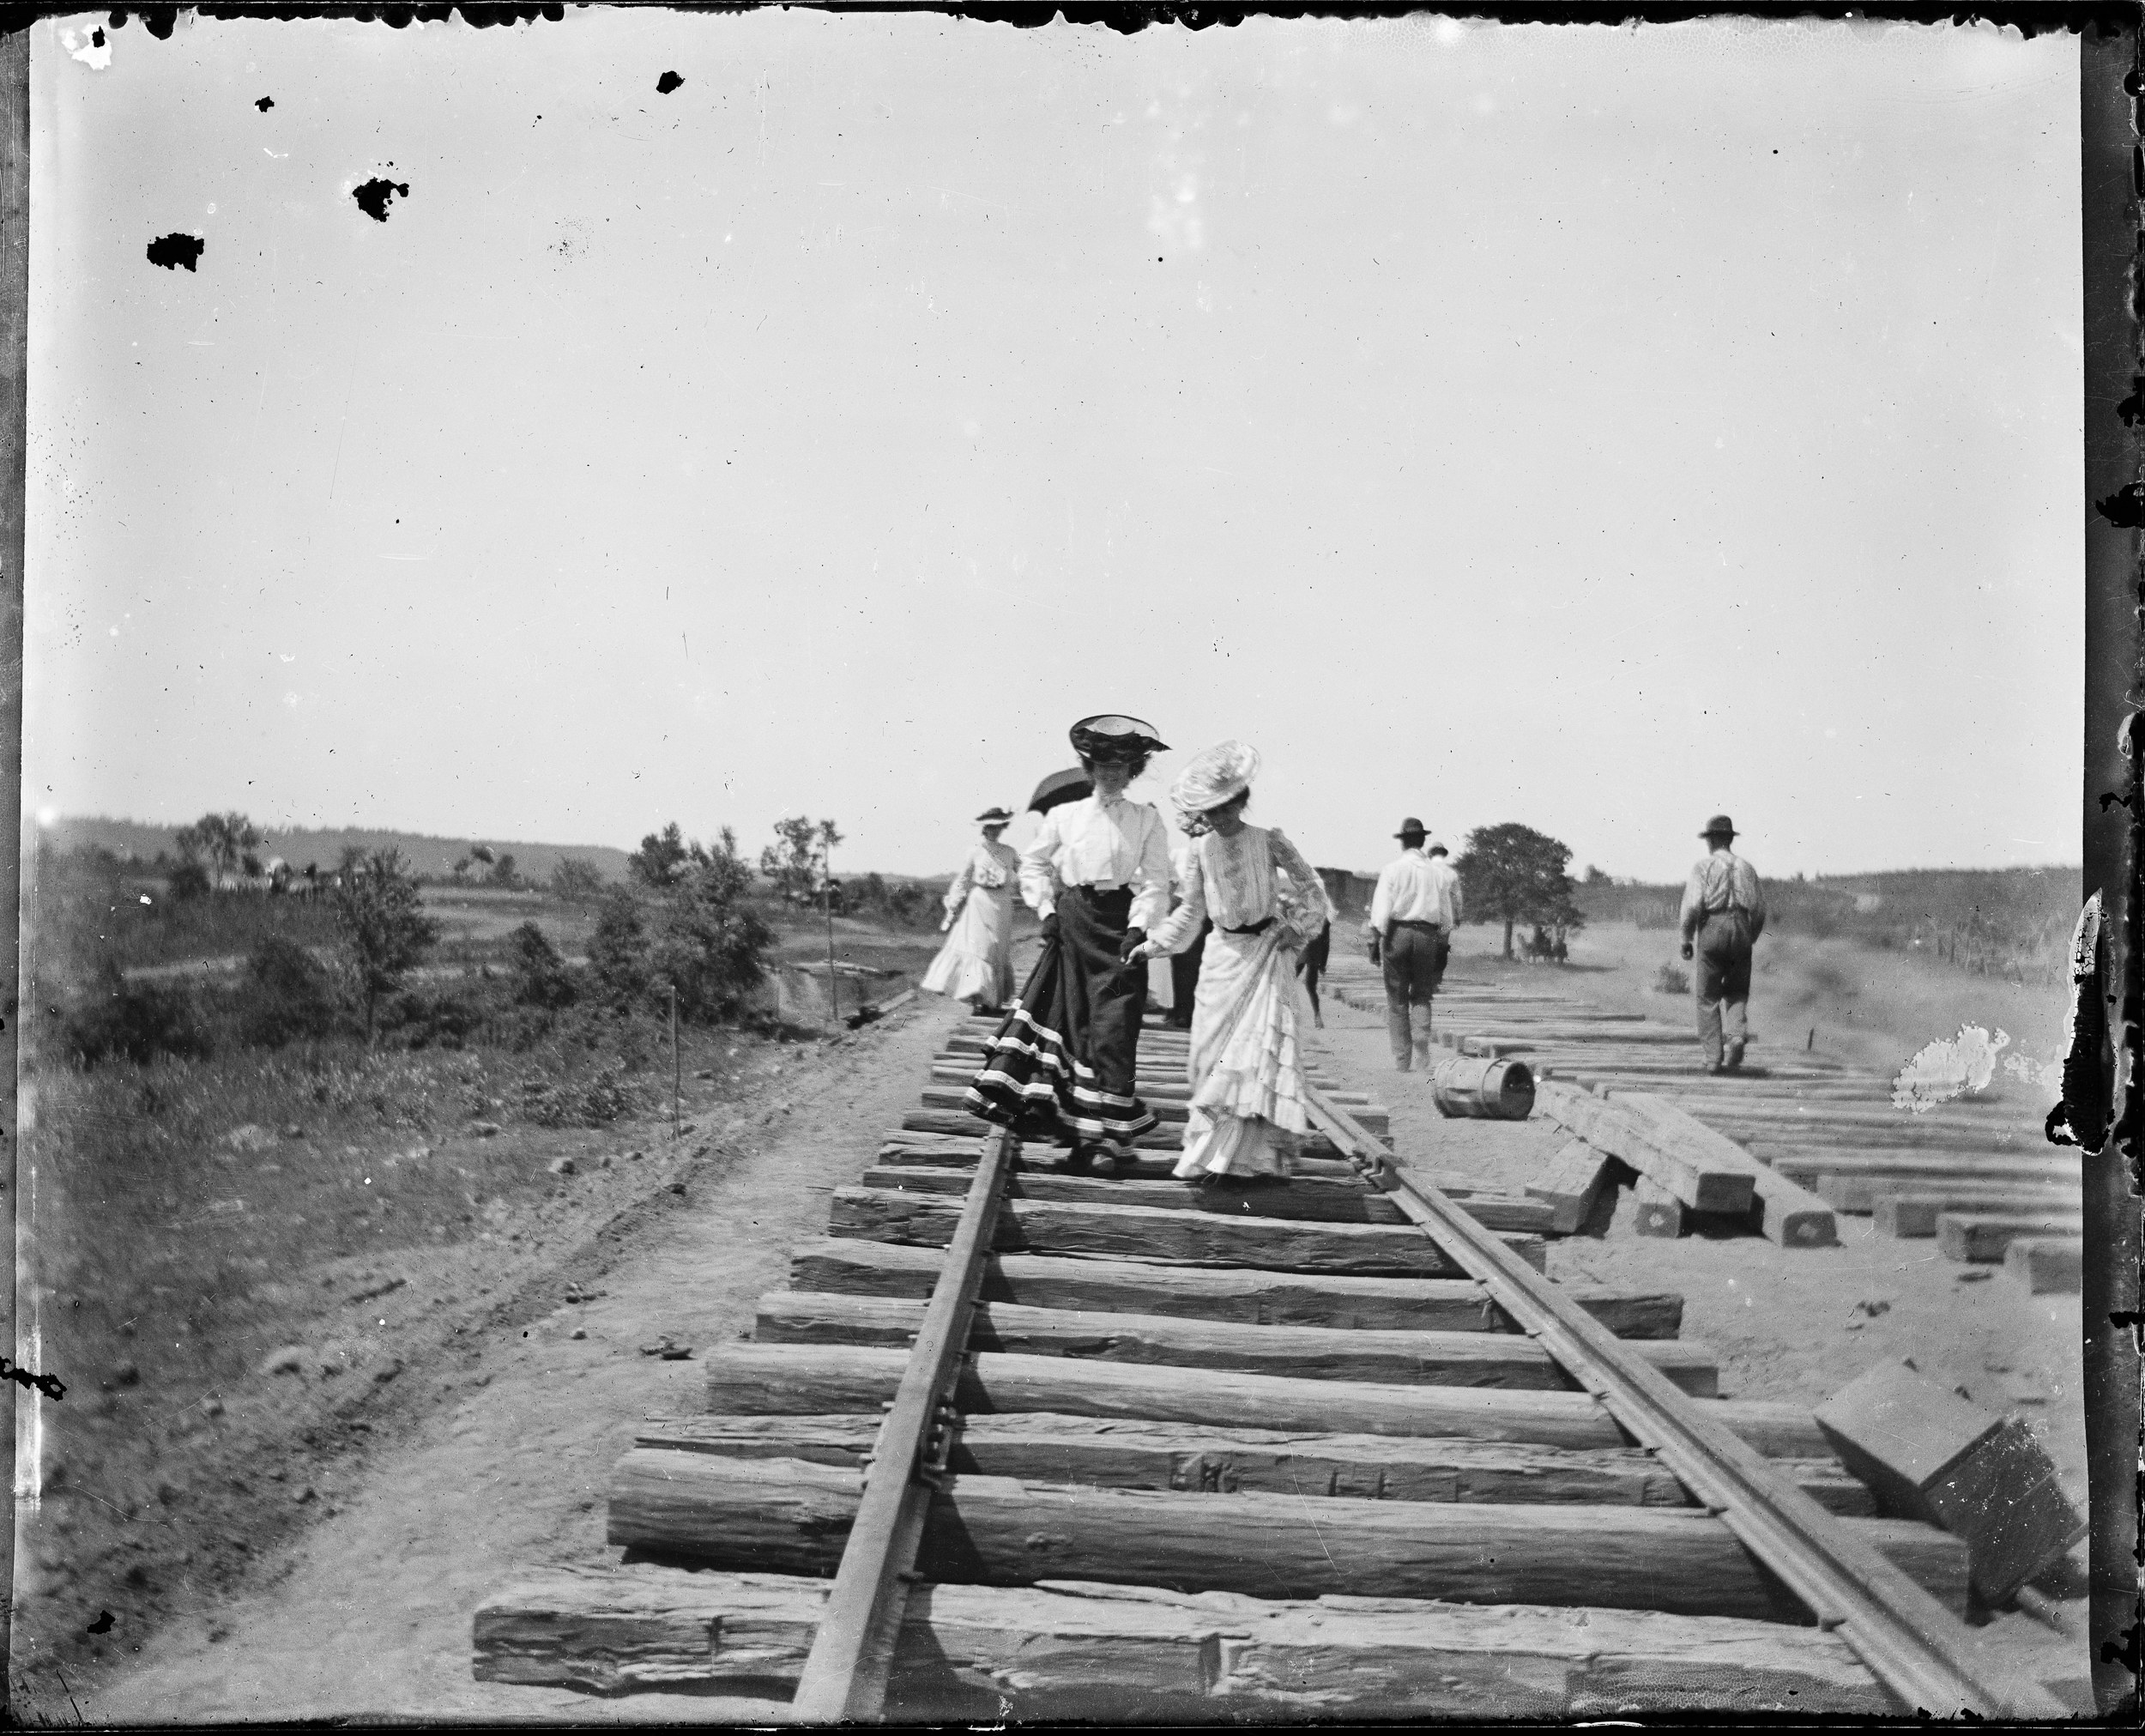 Women in turn-of-the-century hats and long dresses, with men wearing overalls and hats behind them, walk along train tracks under construction in Oklahoma in 1902